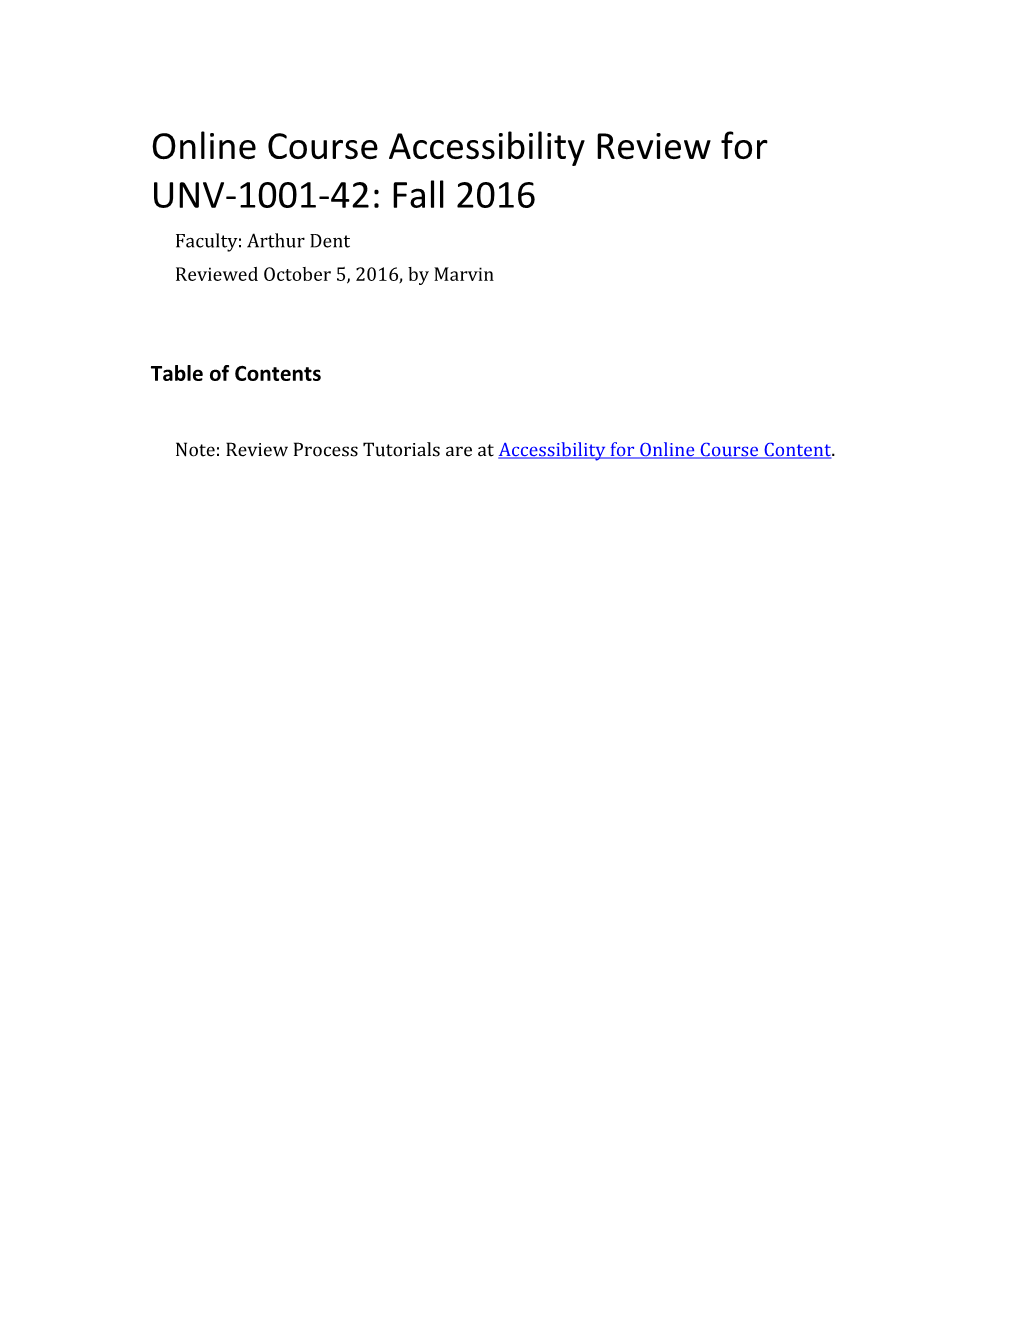 Online Course Accessibility Review for UNV-1001-42: Fall 2016